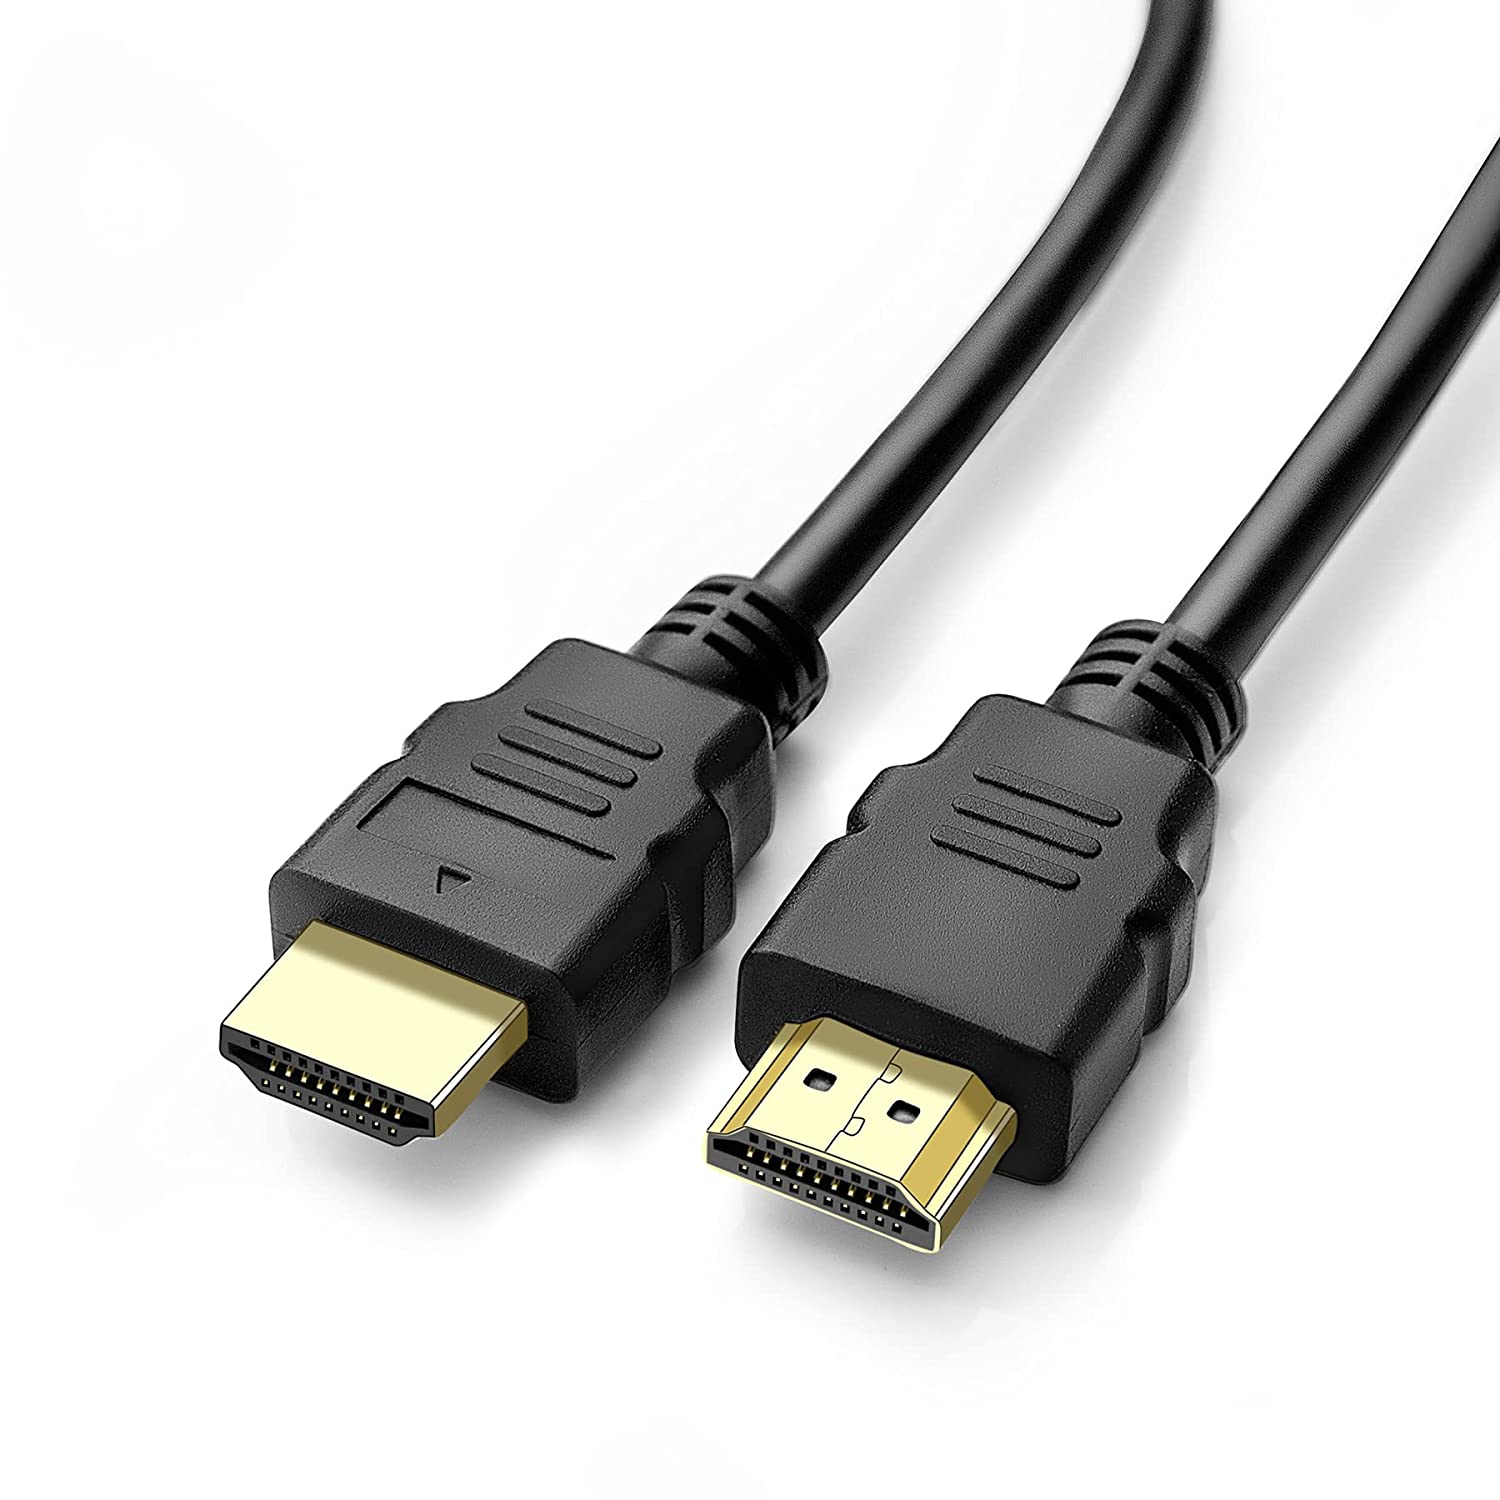 4K HDMI Cable 4FT/1.2M for Nintendo Switch, PS3, PS4, Xbox, High Speed 18Gbps HDMI 2.0 Cord, Support 4K@60Hz, 3D,